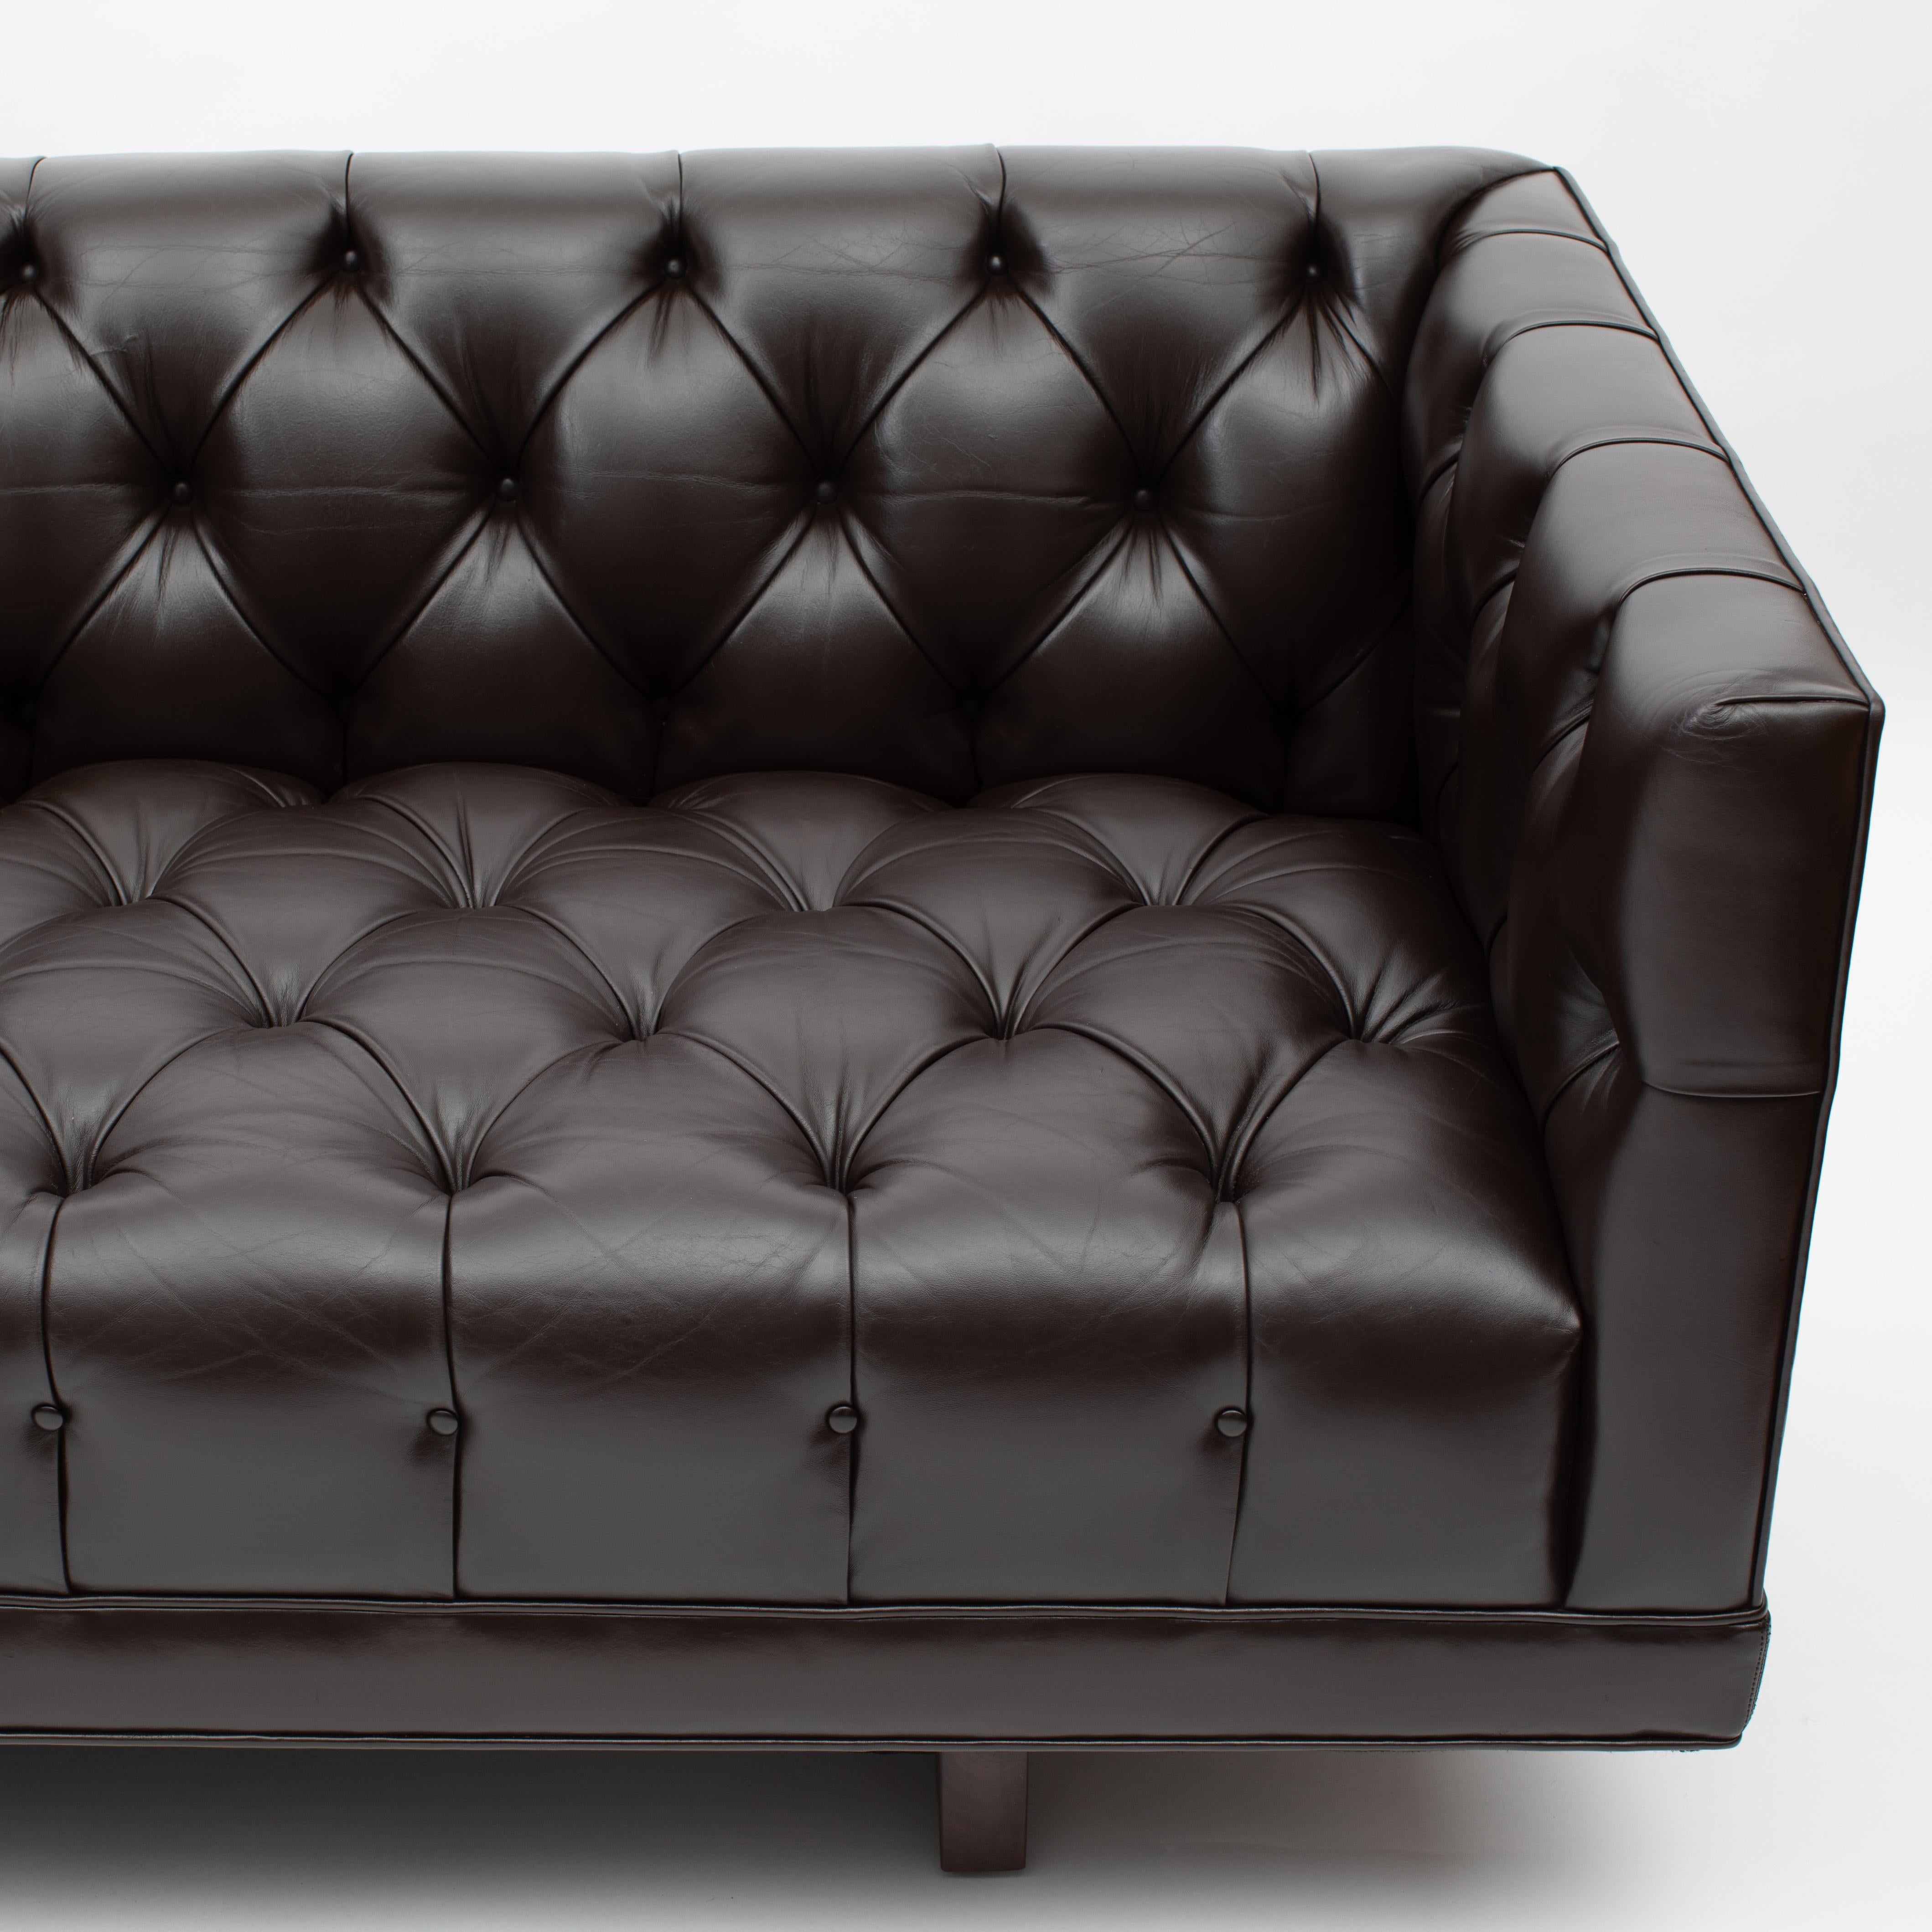 Ward Bennett Button-Tufted Leather Sofa for Lehigh Furniture, circa 1960s For Sale 1